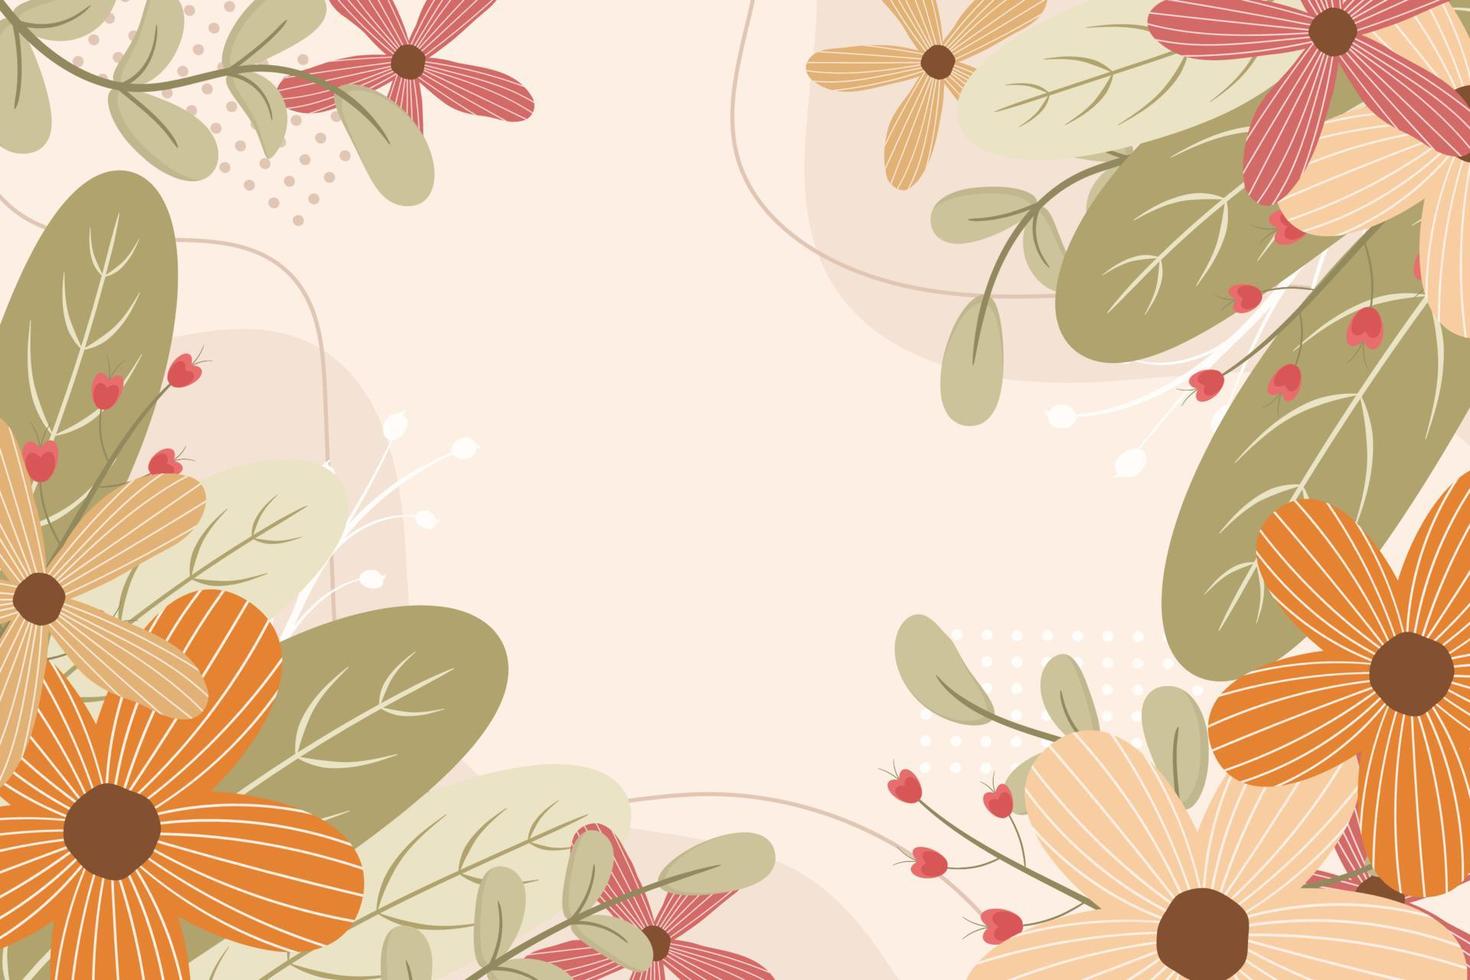 Beautiful hand drawn spring flower background vector